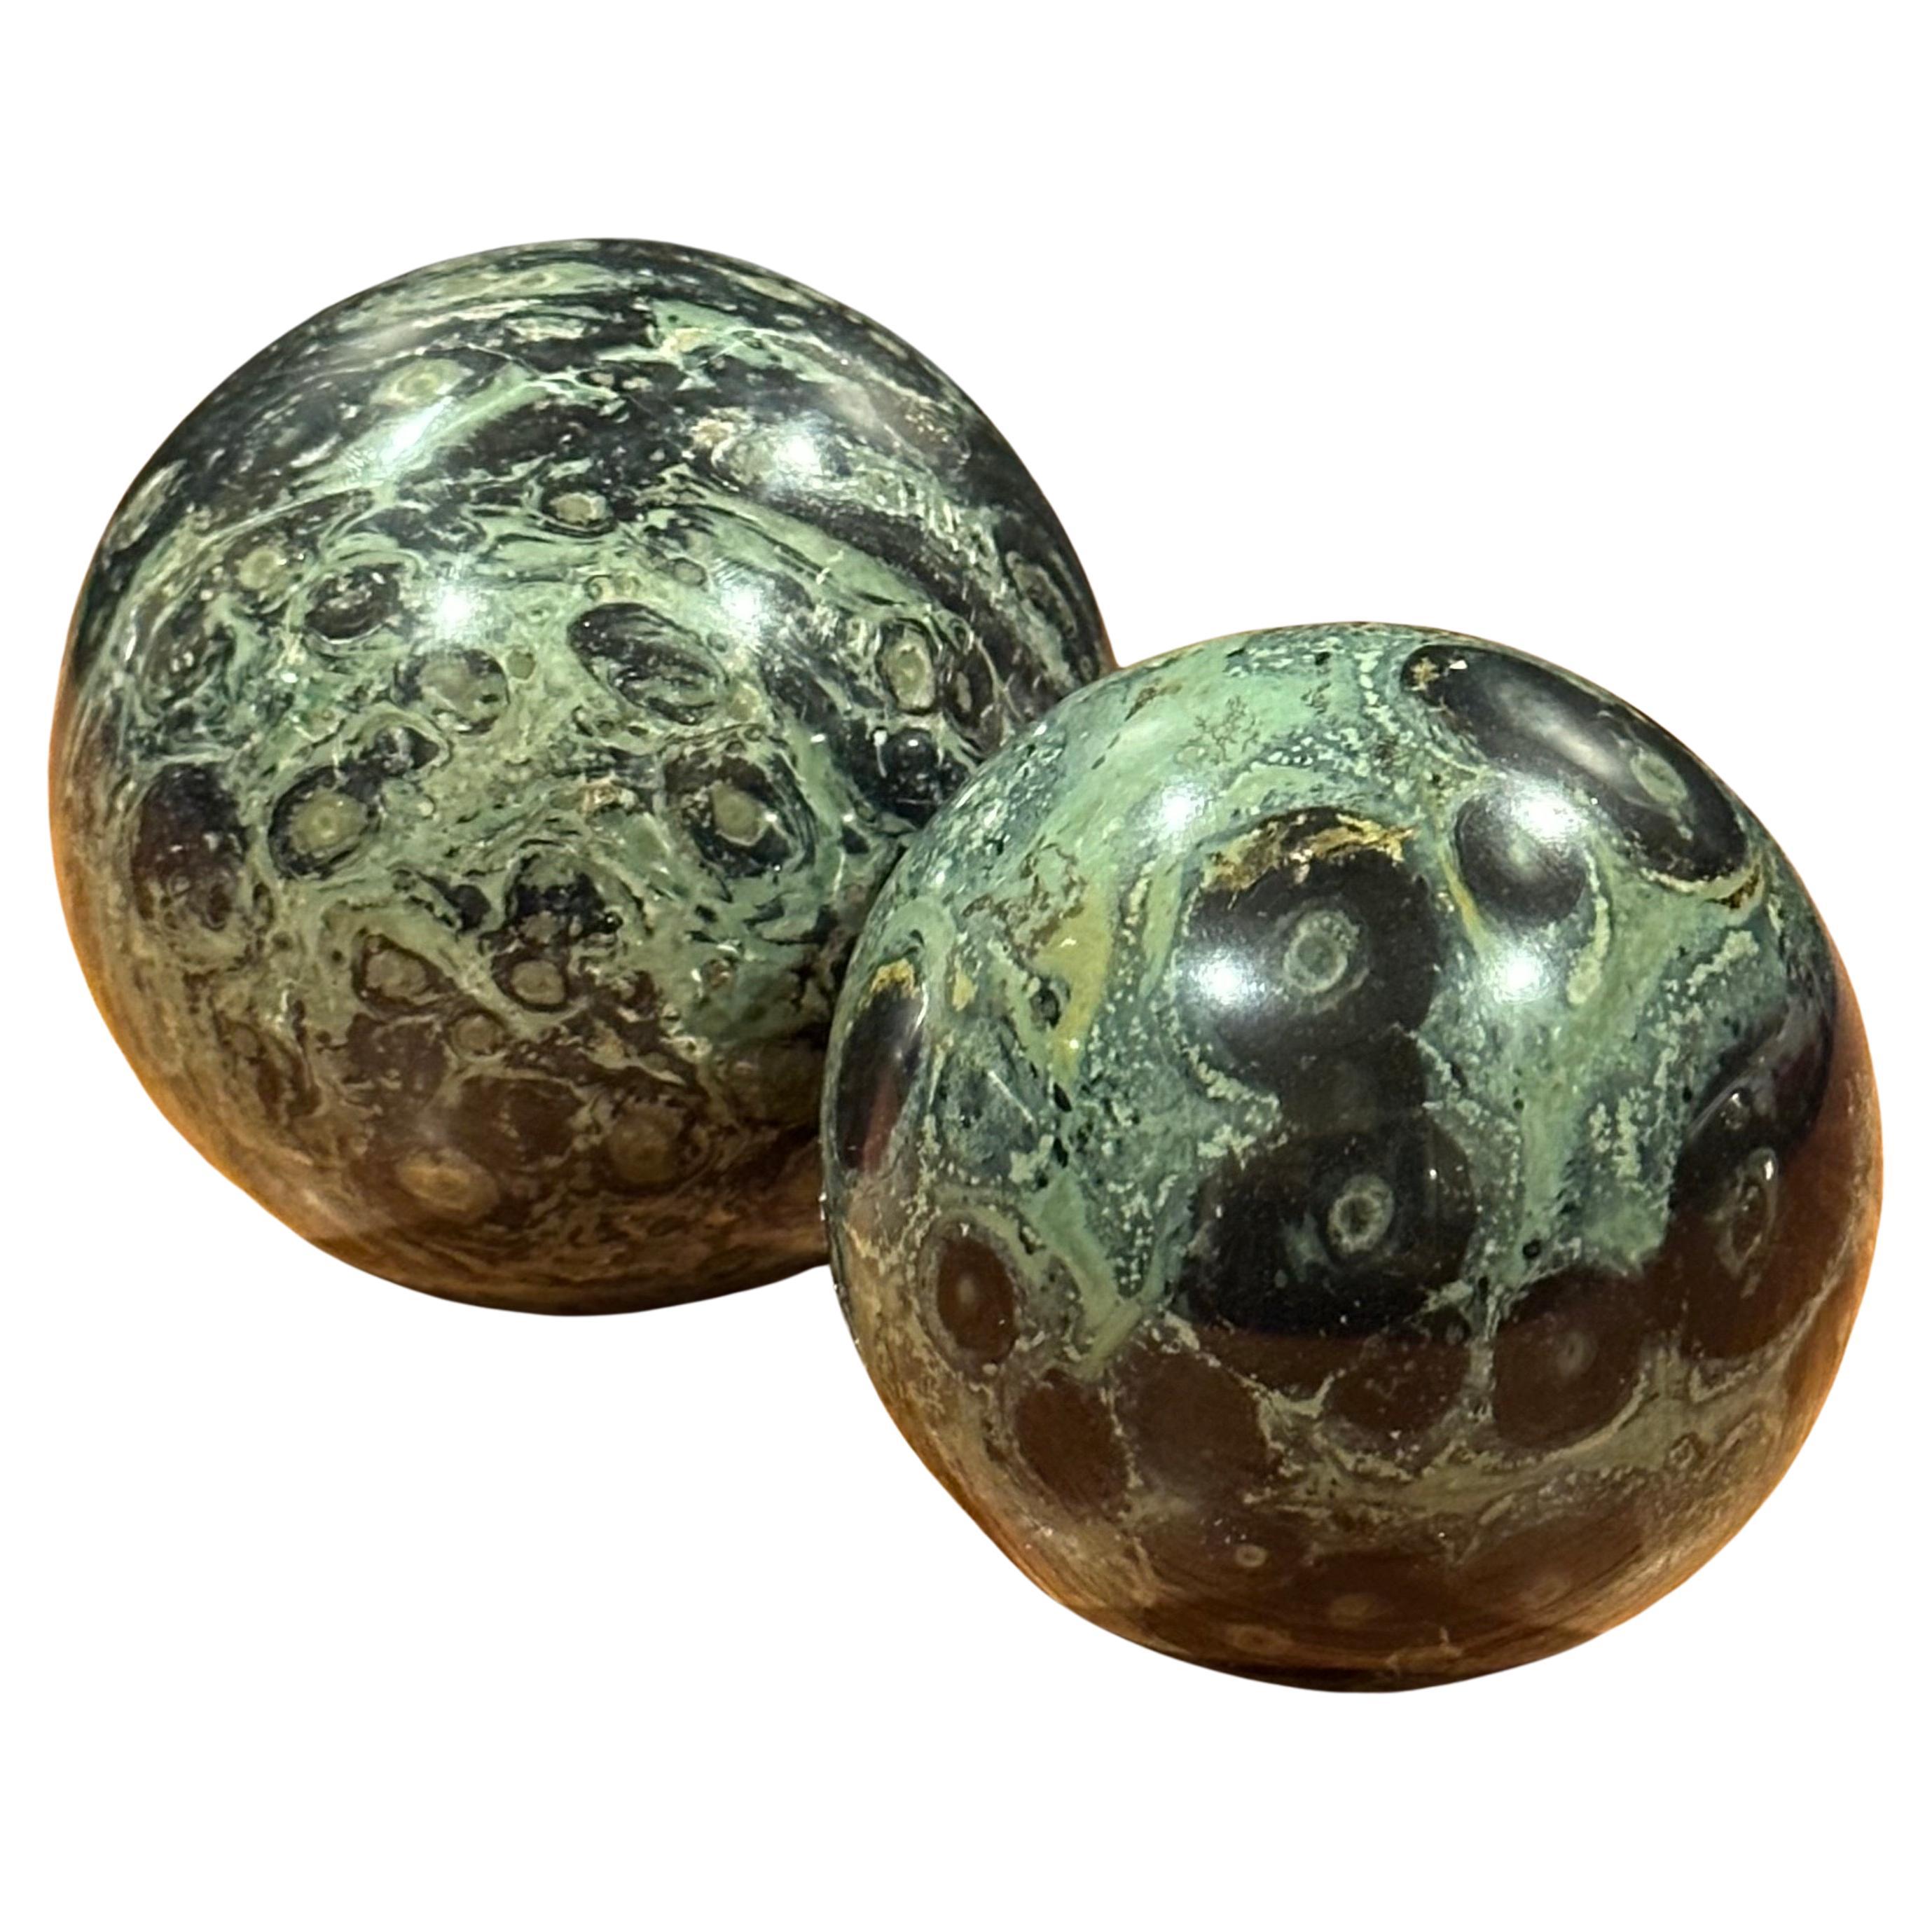 Gorgeous set of two post-modern marble spheres / paperweights, circa 1980s. The pieces are in very good condition with no chips or cracks and the largest one measures  3